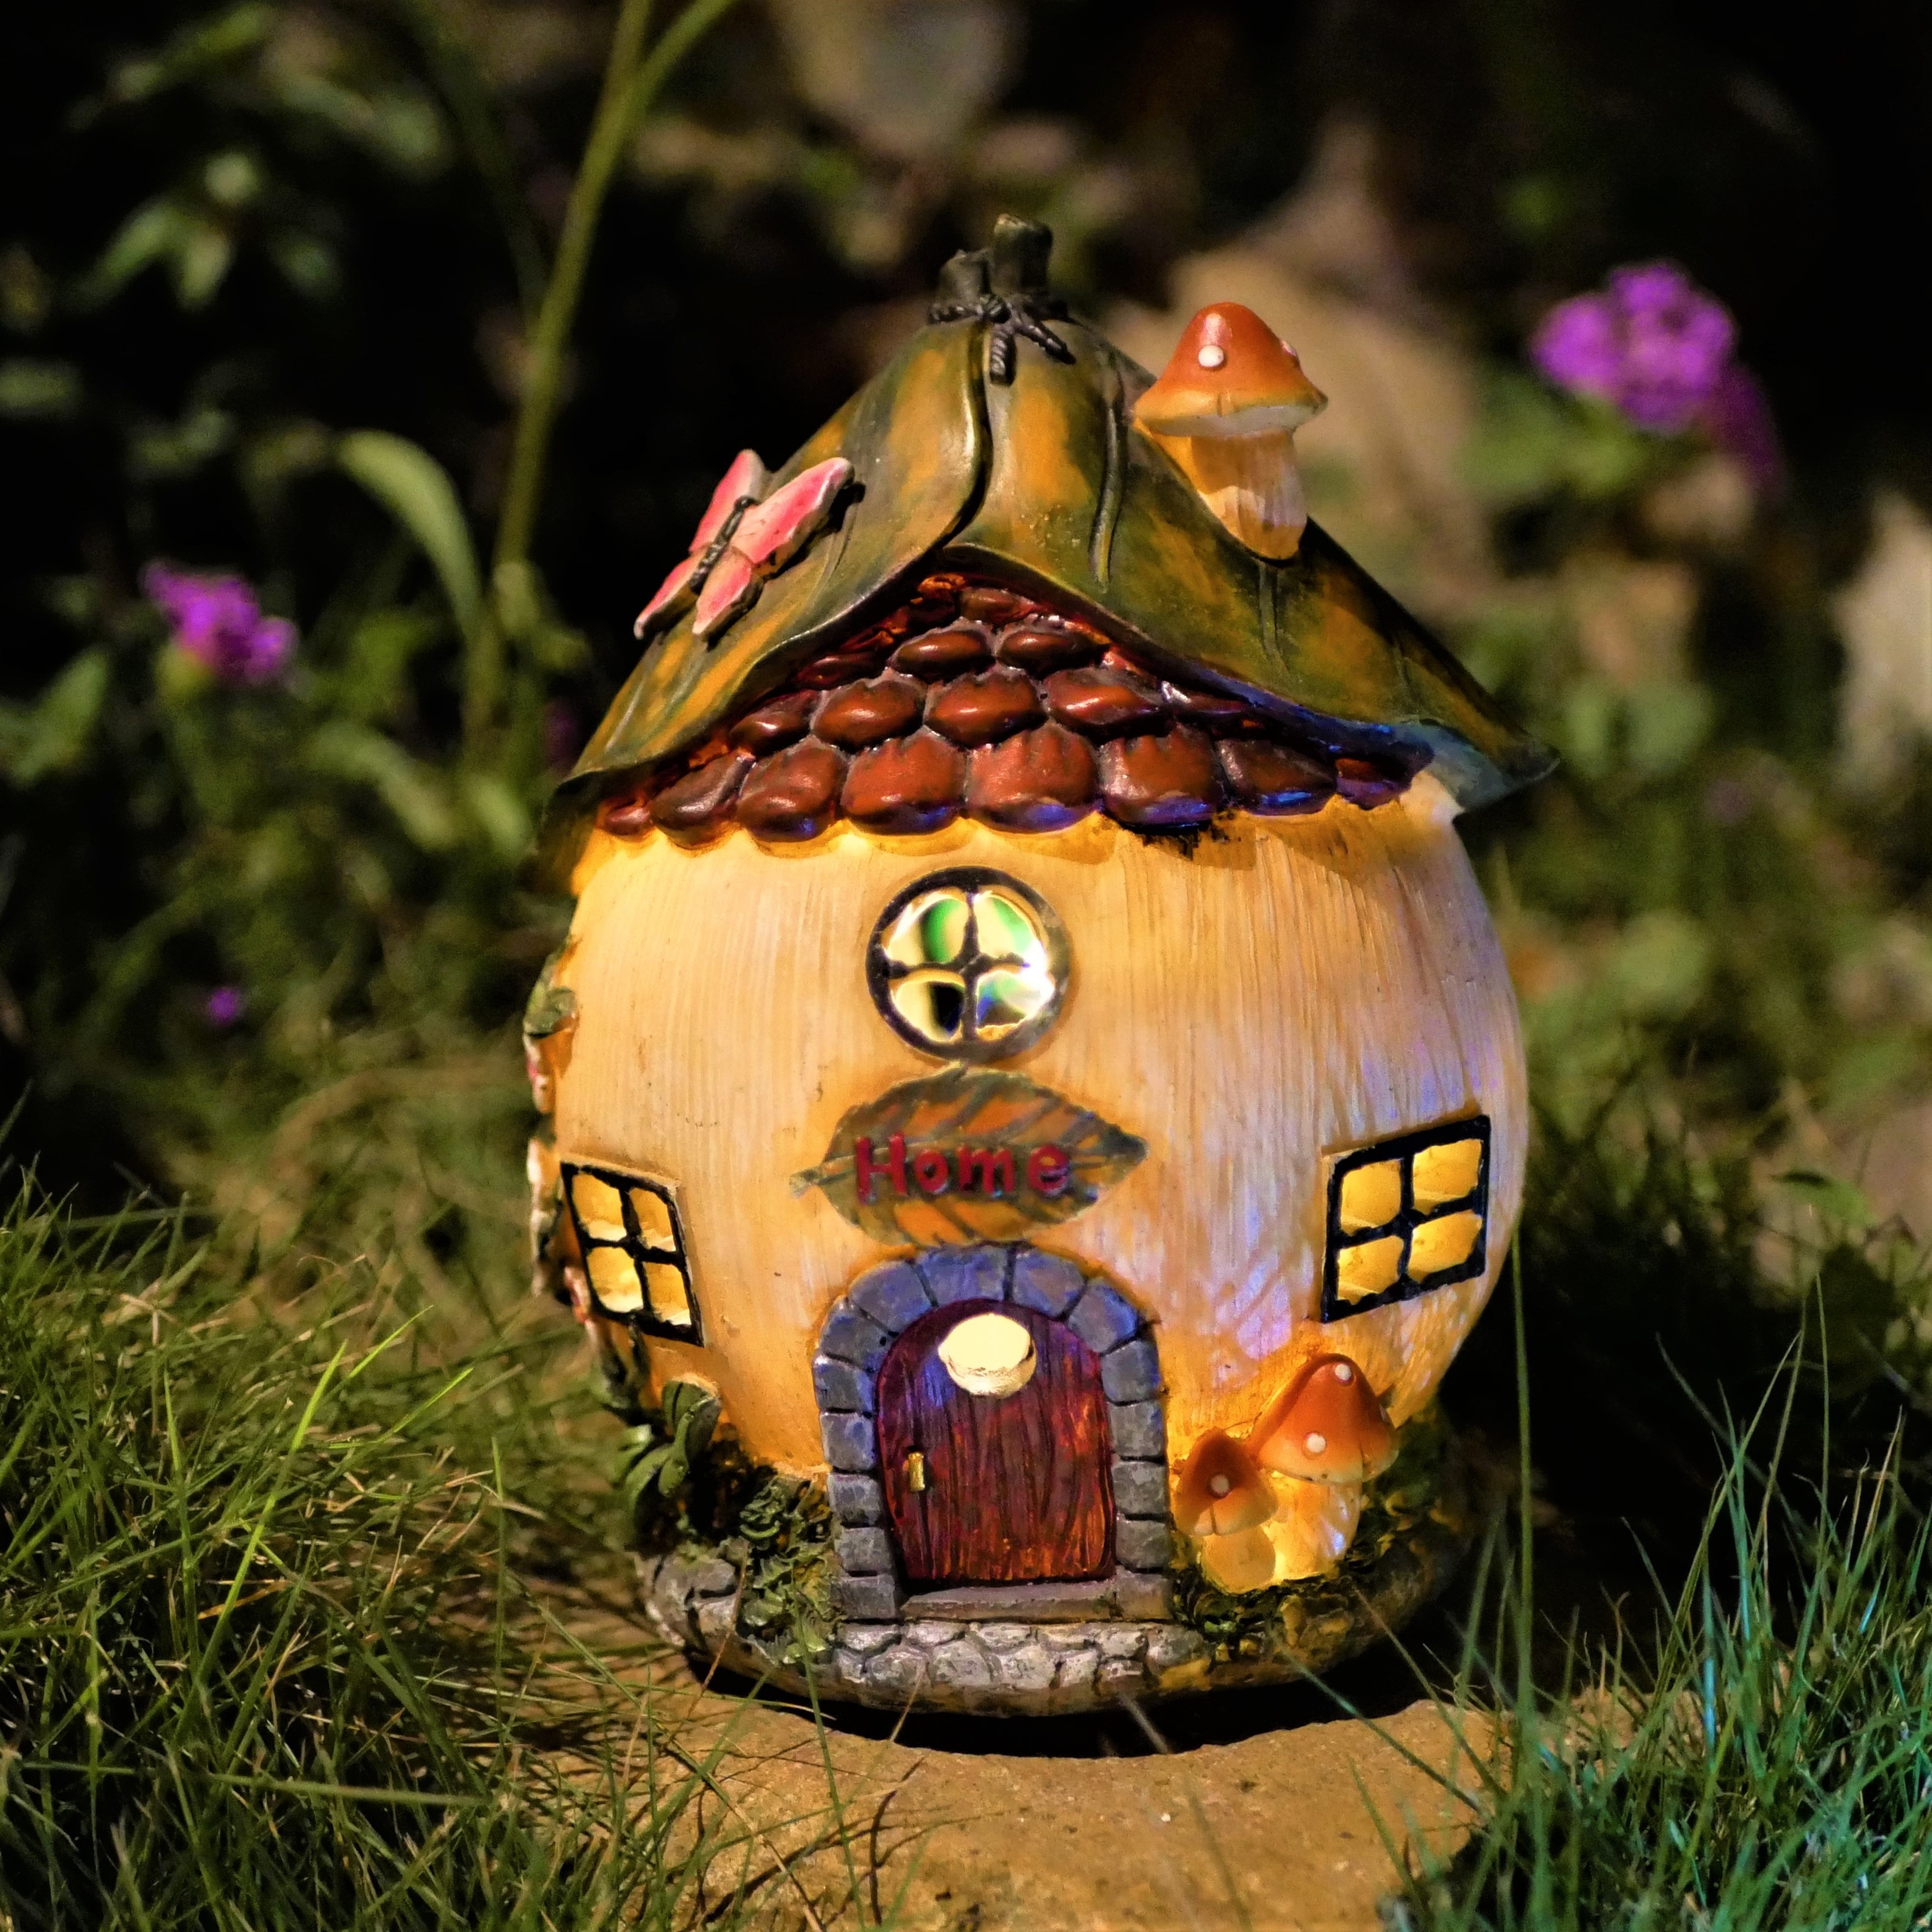 

1pc Vine Resin Cottage Solar Lantern, Suitable For Garden, Patio, Lawn, Doorway, Balcony, Pond, Window Sill, Special Gift For Friends On Holidays